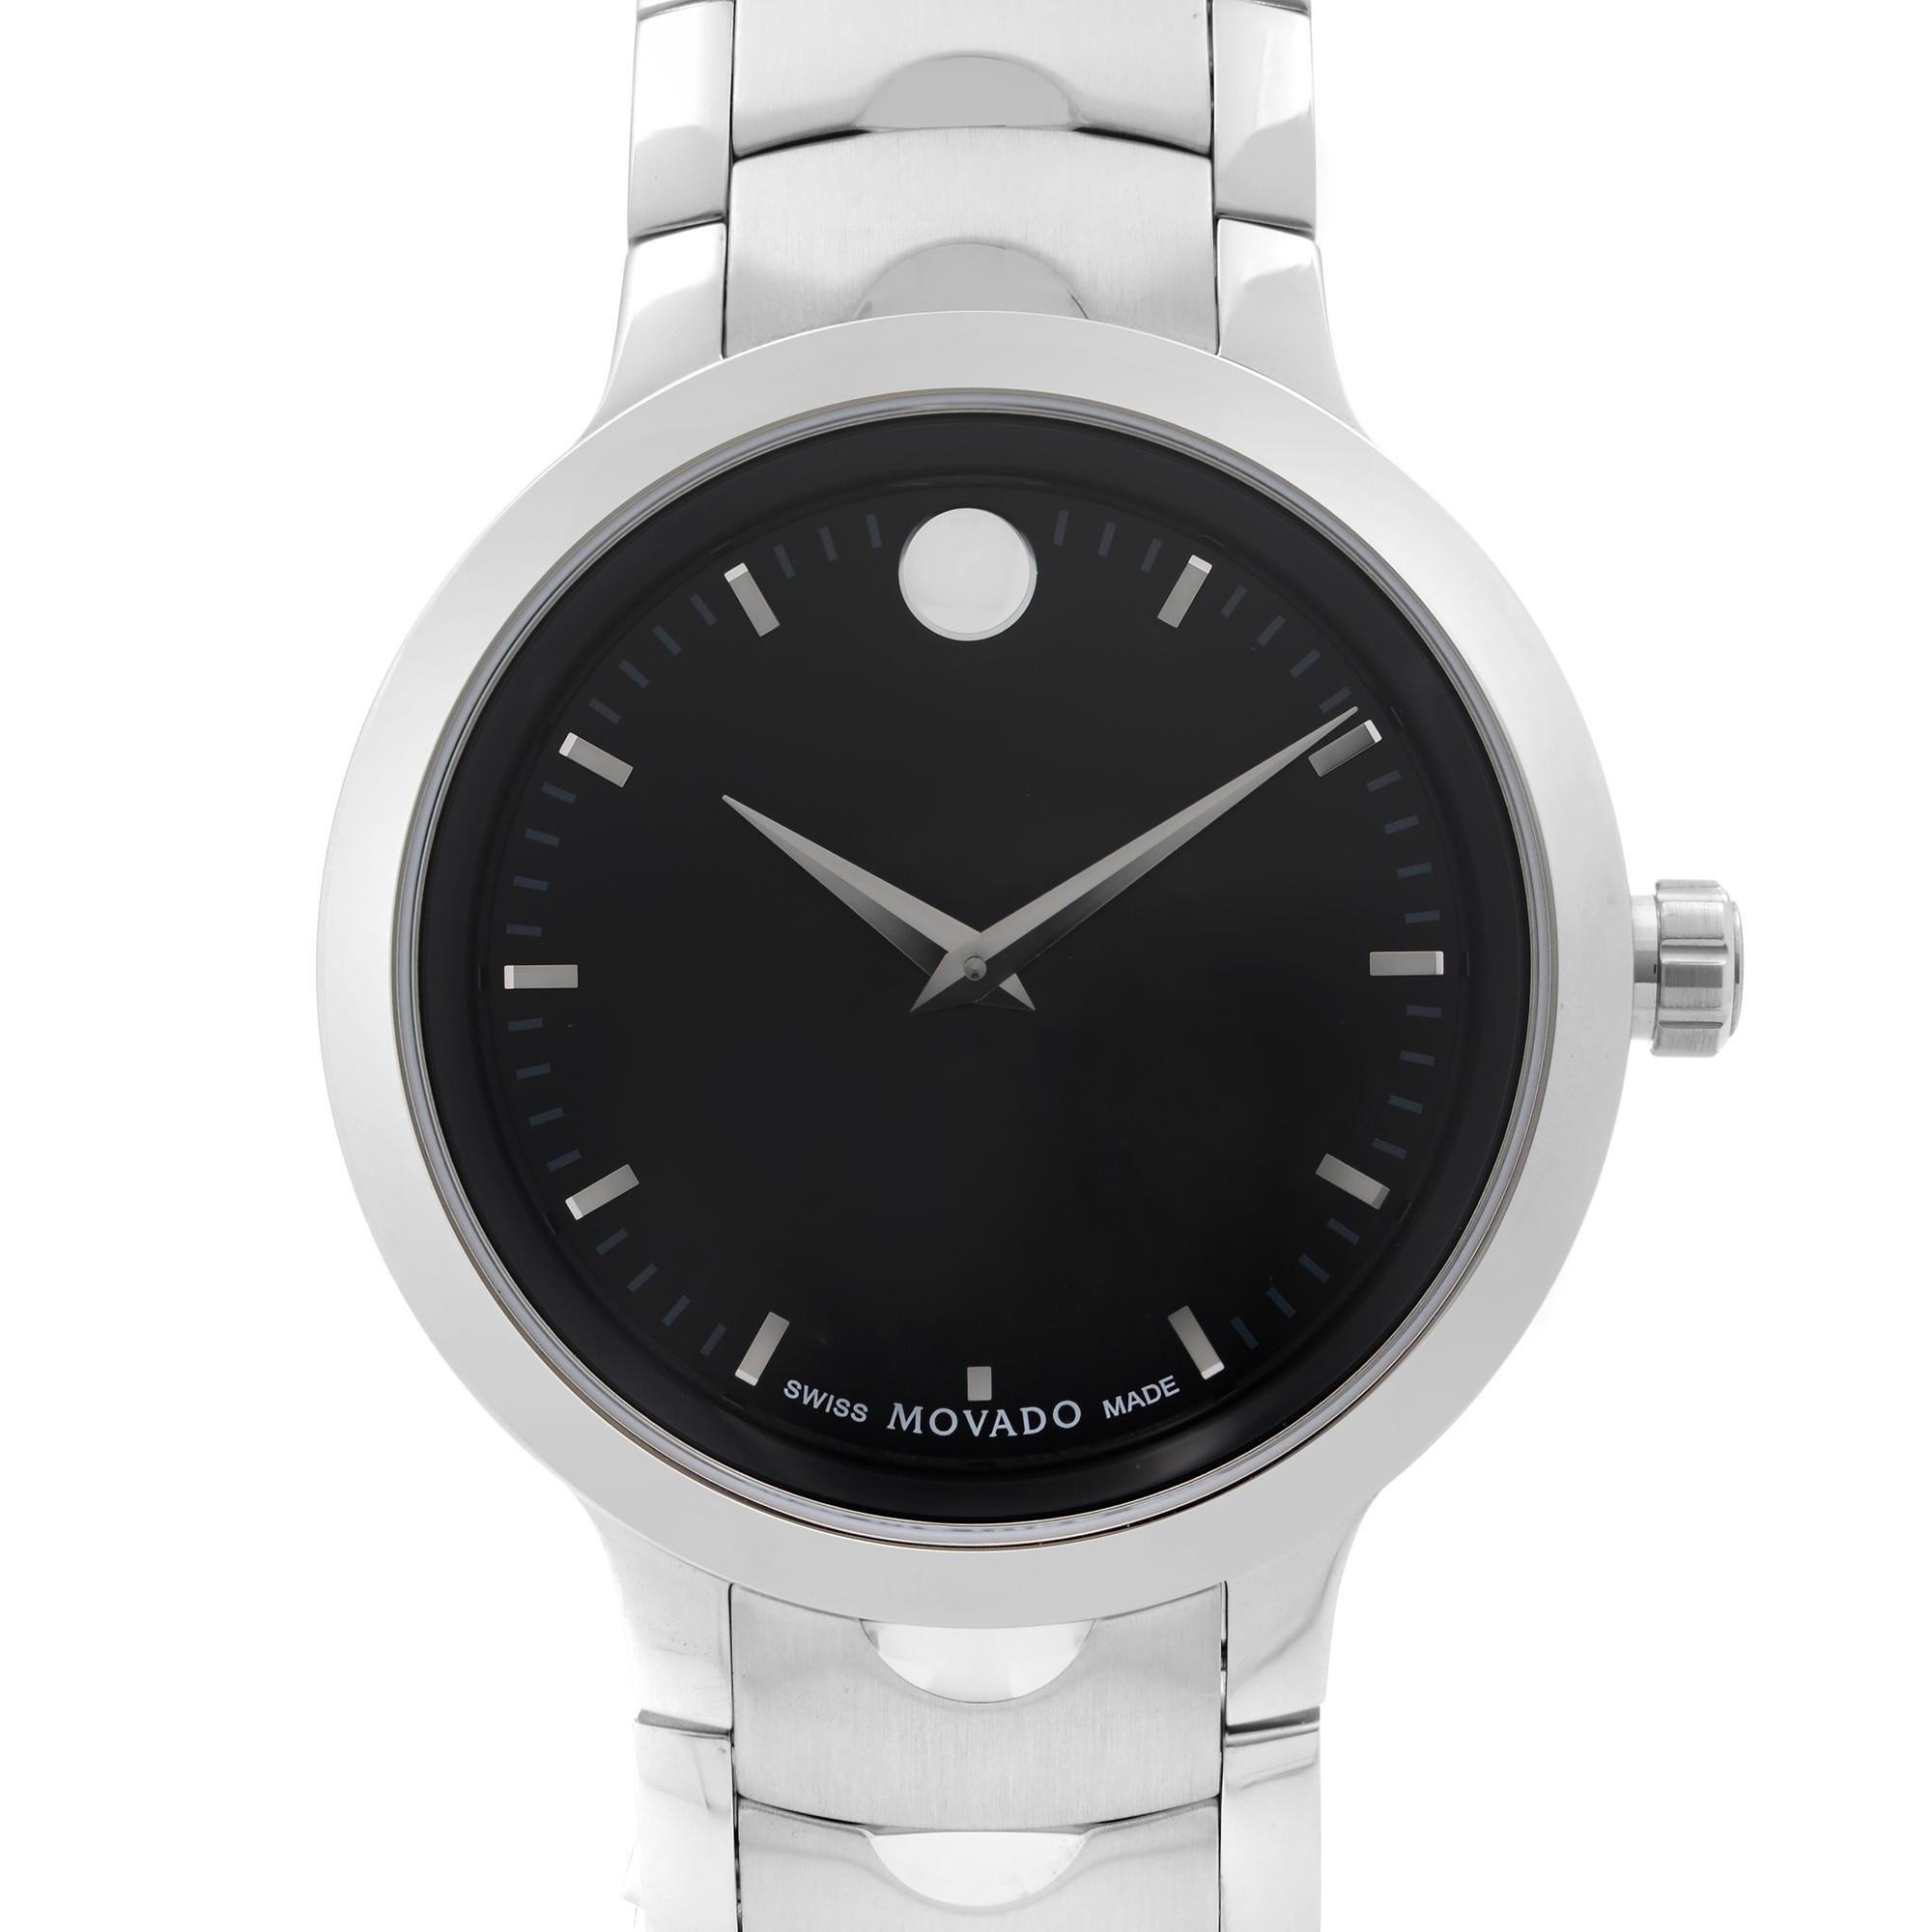 Unworn Movado Luno 607041. Original Box and Papers are Included. Covered by 1-year Chronostore Warranty.
Brand Movado
Type Wristwatch
Department Men
Model Number 607041
Country/Region of Manufacture Switzerland
Style Sport
Model 607041
Vintage